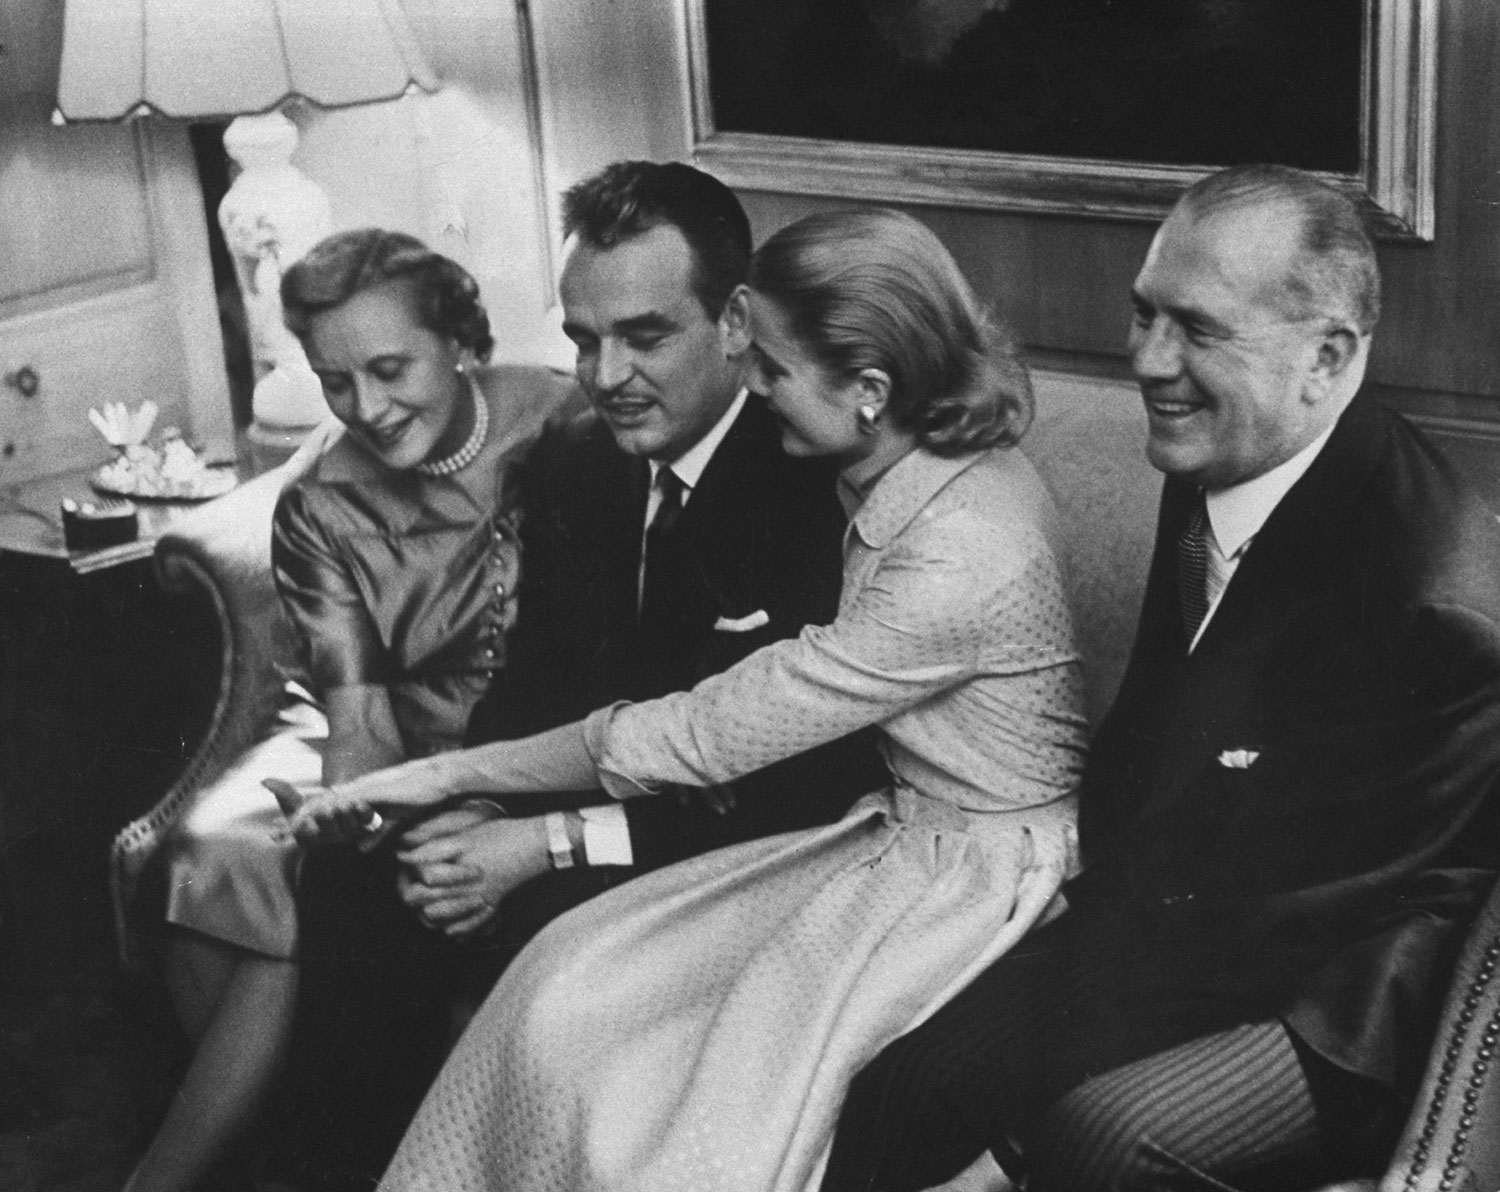 Grace Kelly and Prince Rainier show her engagement ring to her mother and father at the Kelly home in Philadelphia, 1956.